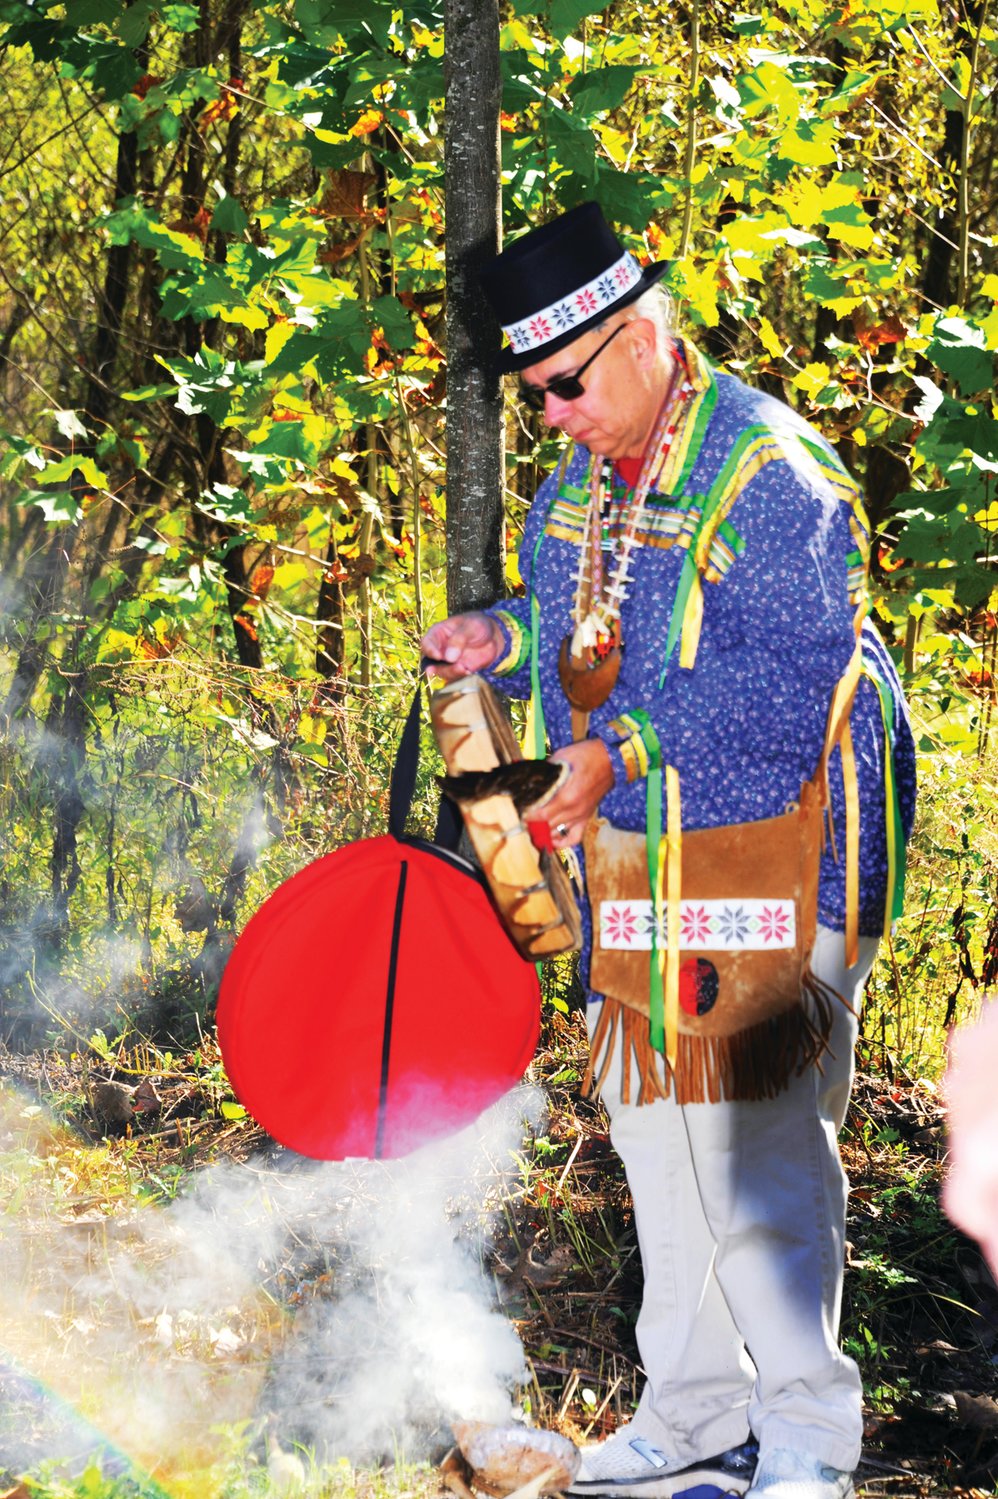 Lenape Chief Chuck Gentlemoon DeMund offered a Lenape prayer during the formal opening ceremony for Aquetong Spring Park on Route 202 in Solebury Township, site of an ancient spring where members of the Lenape Tribe had a village.